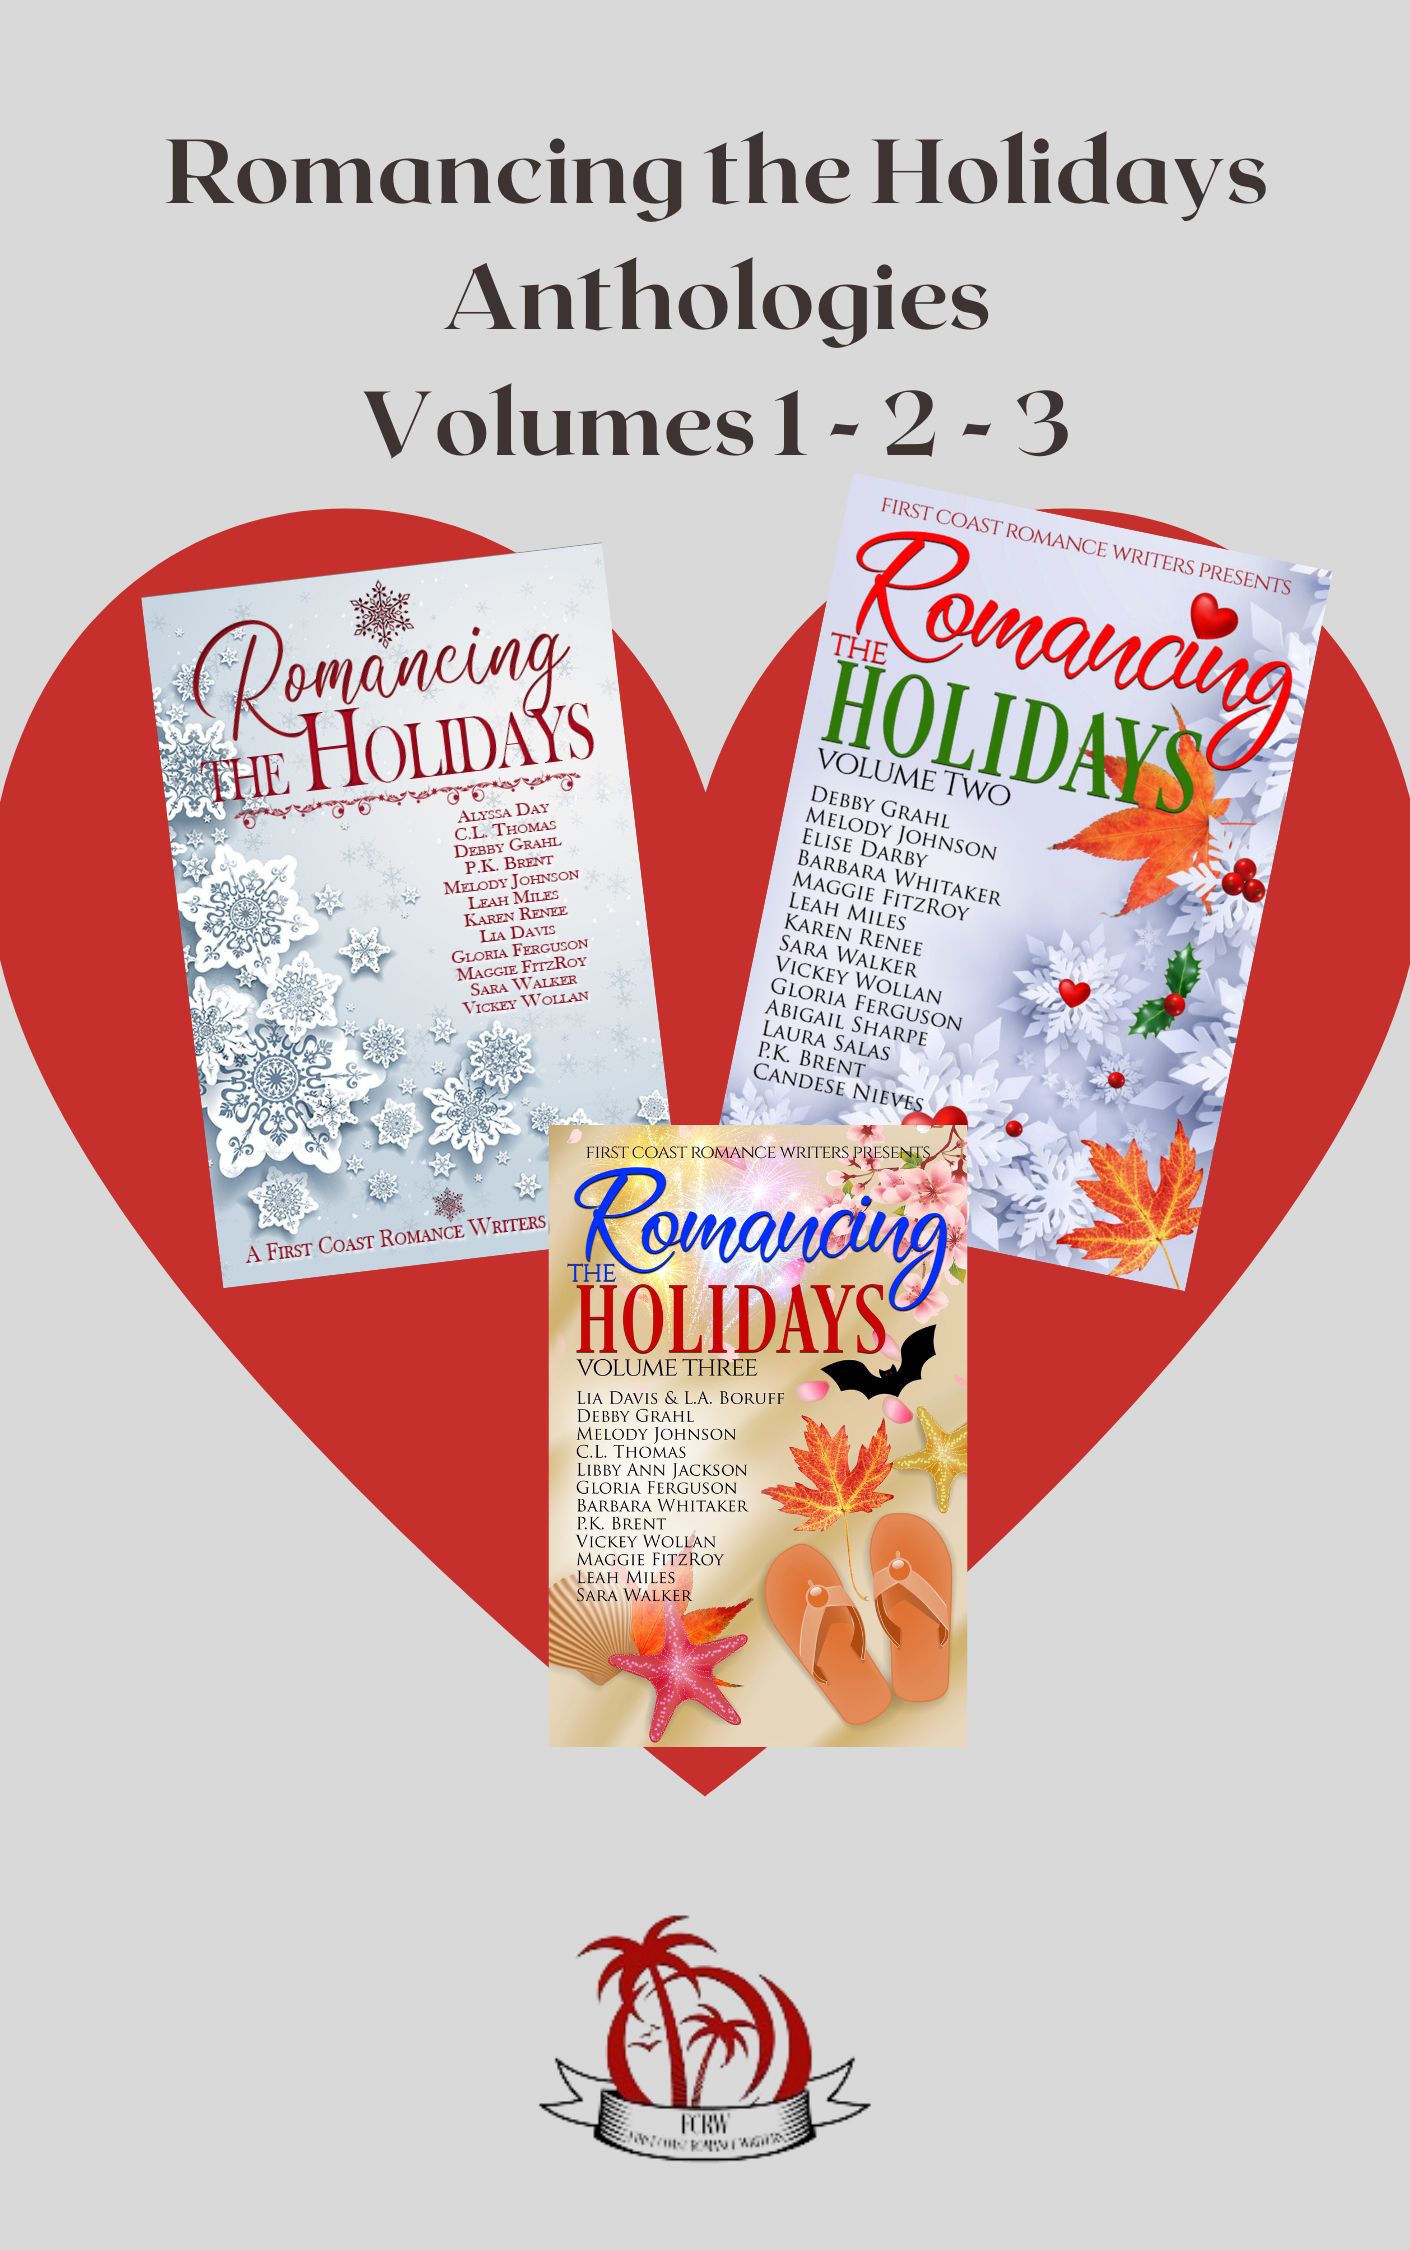 3d book display image of Romancing the Holidays Anthologies